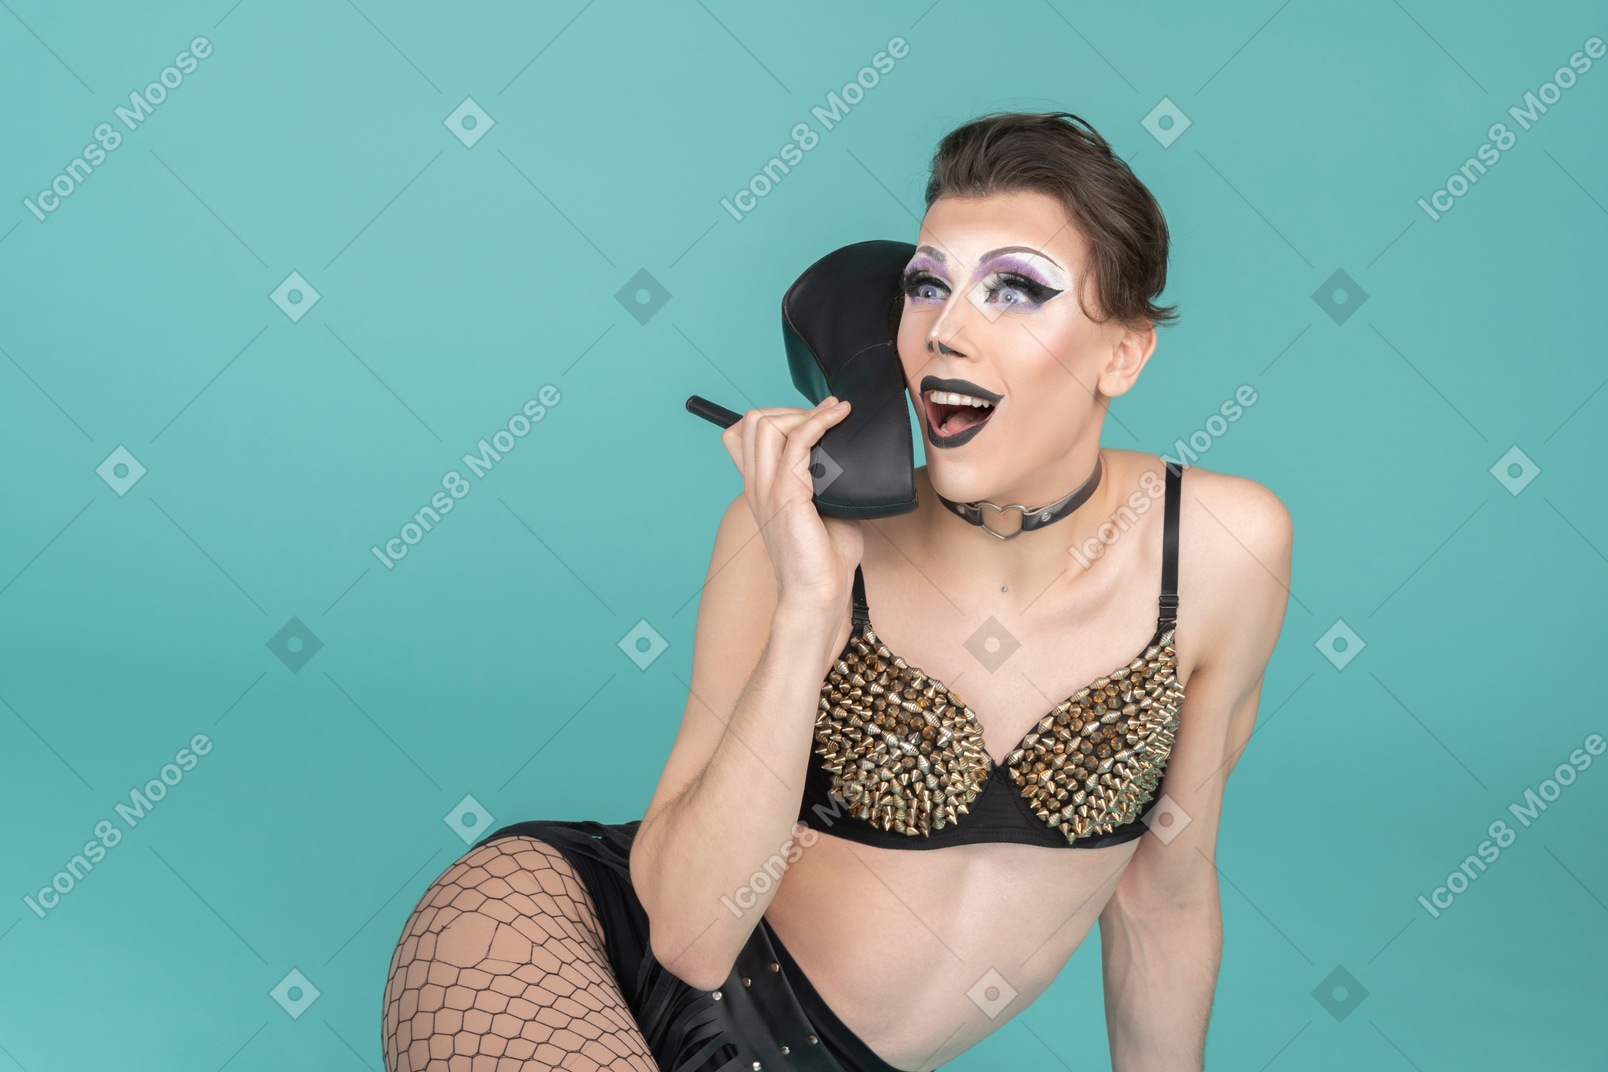 Drag queen in studded bra using shoe as phone